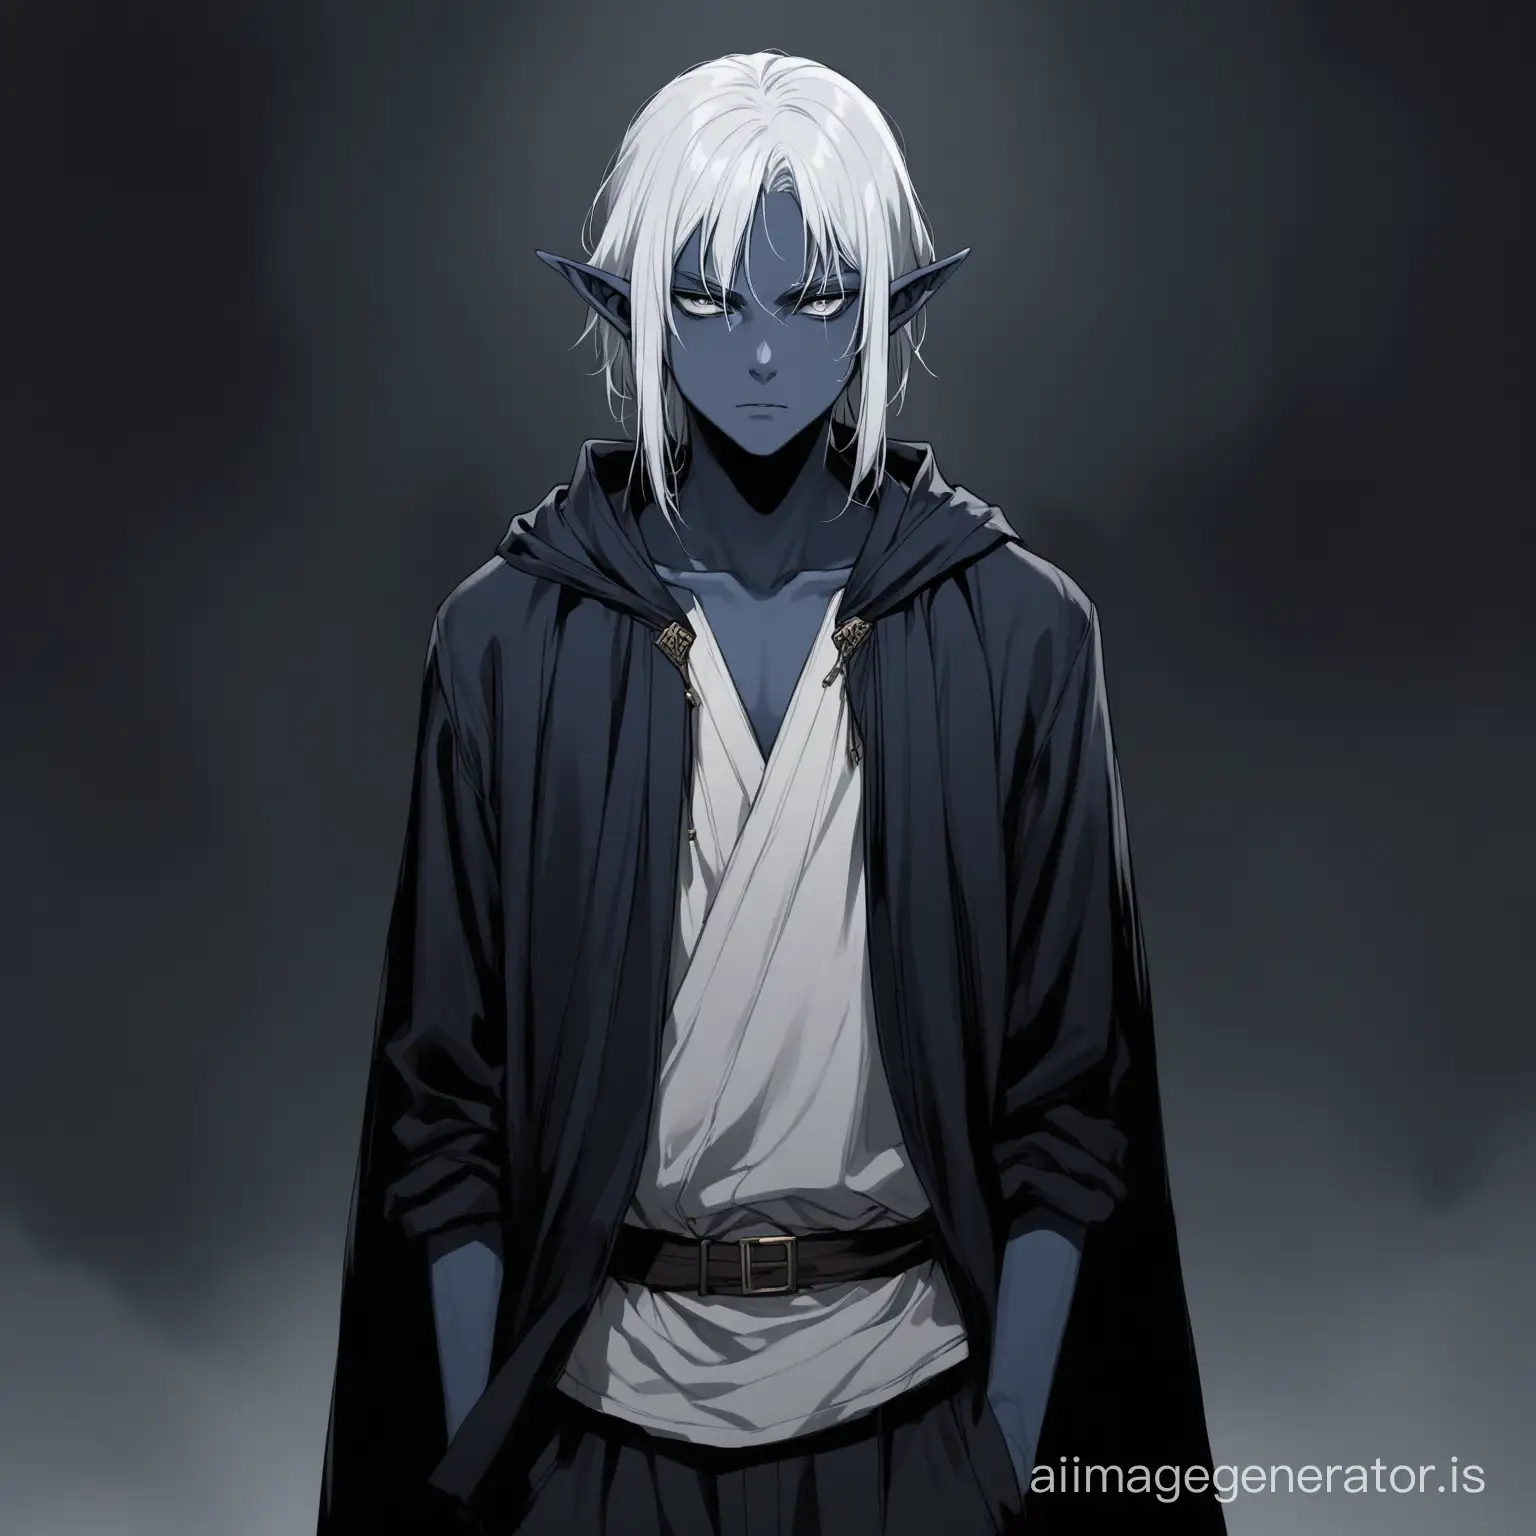 A 16-year-old boy, a dark elf with gray-blue skin, white hair, in a dark robe, jacket and trousers stands in the dark with a sullen face